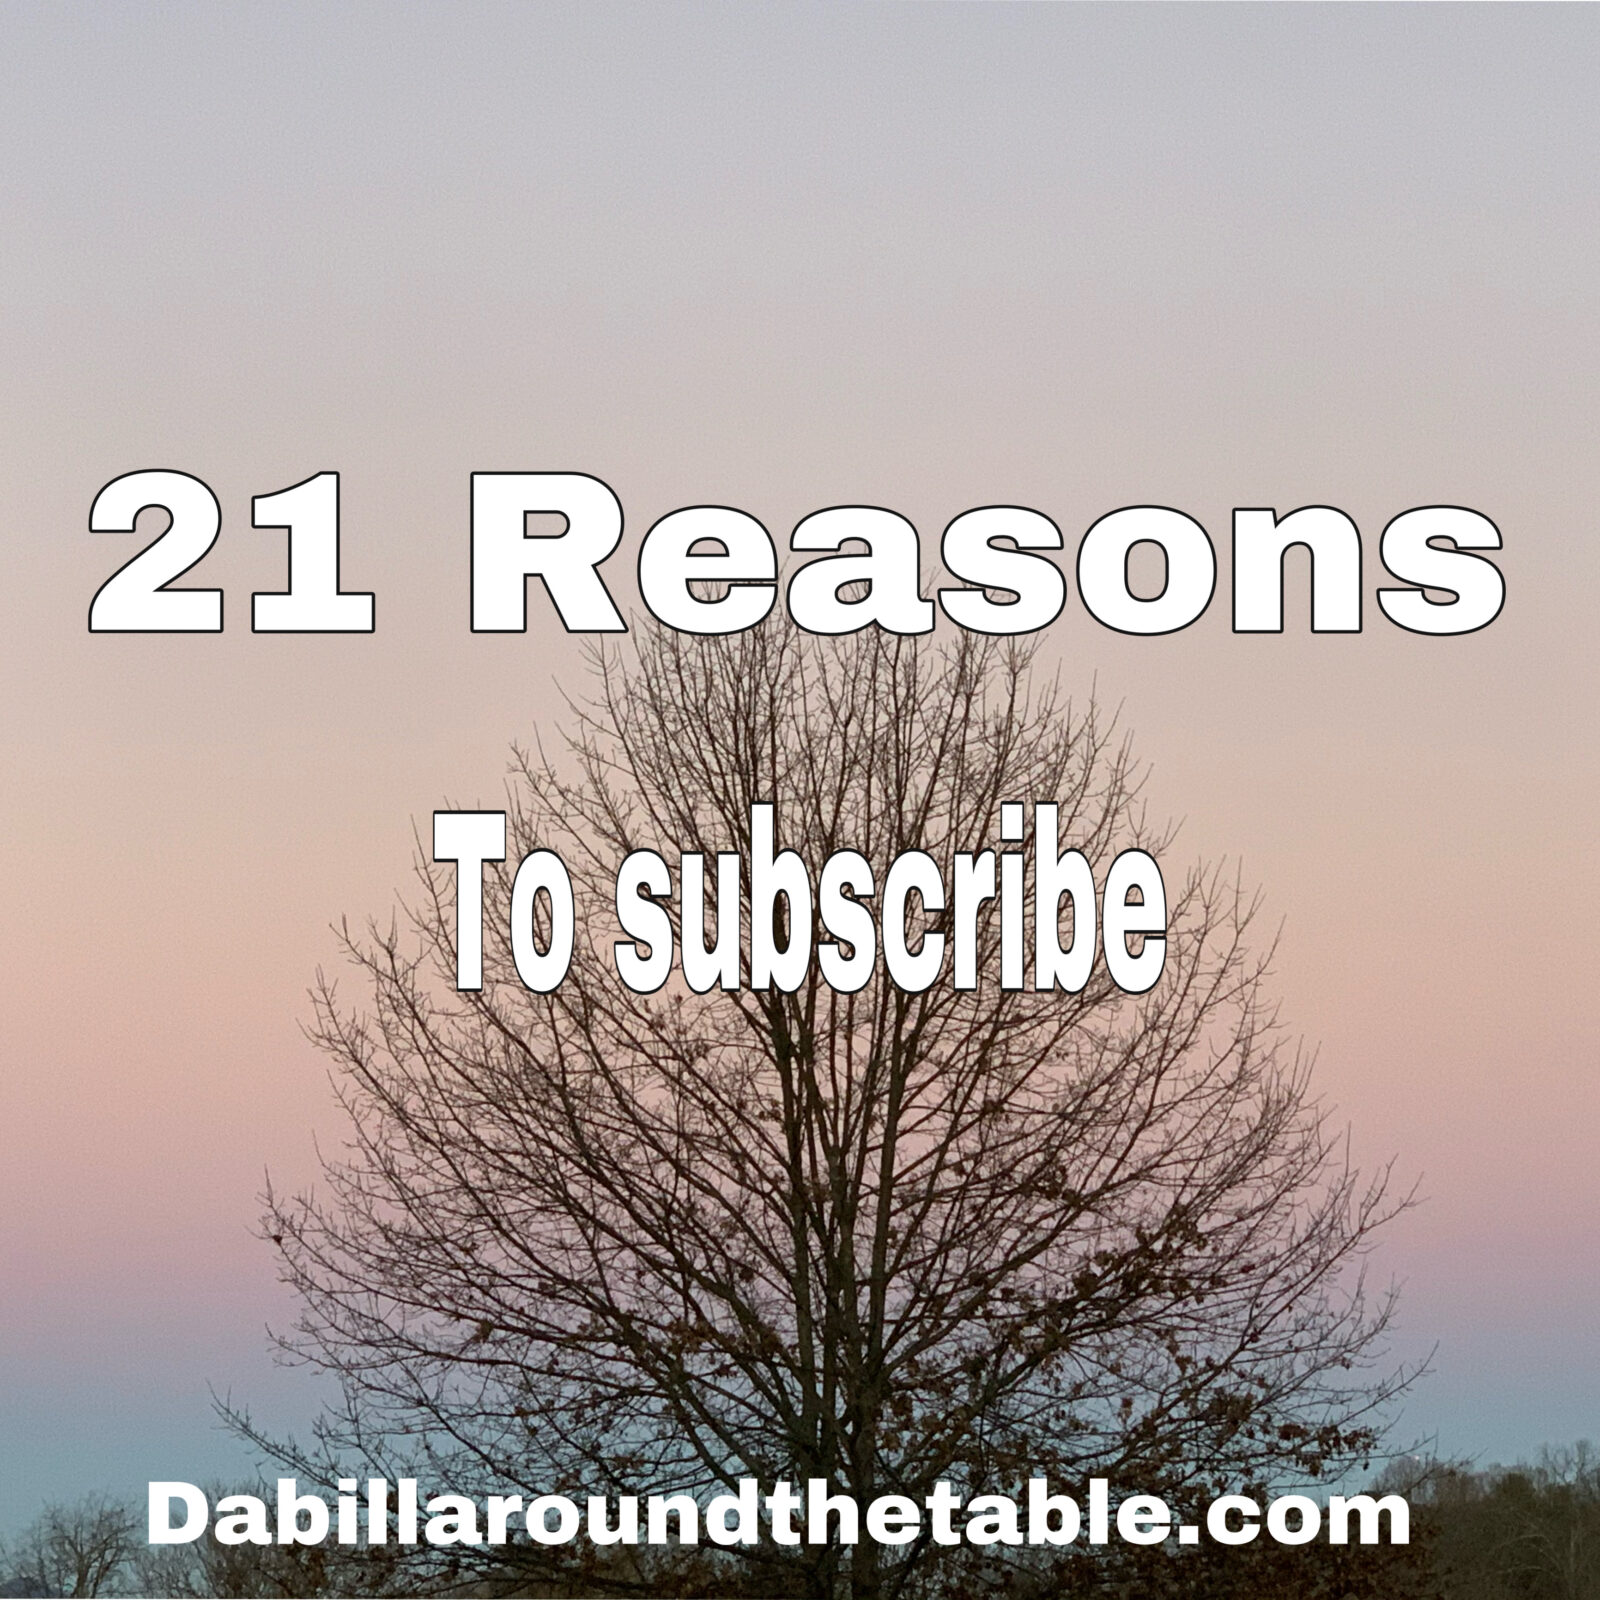 21 Reasons to Subscribe to dabillaroundthetable monthly email in 2021